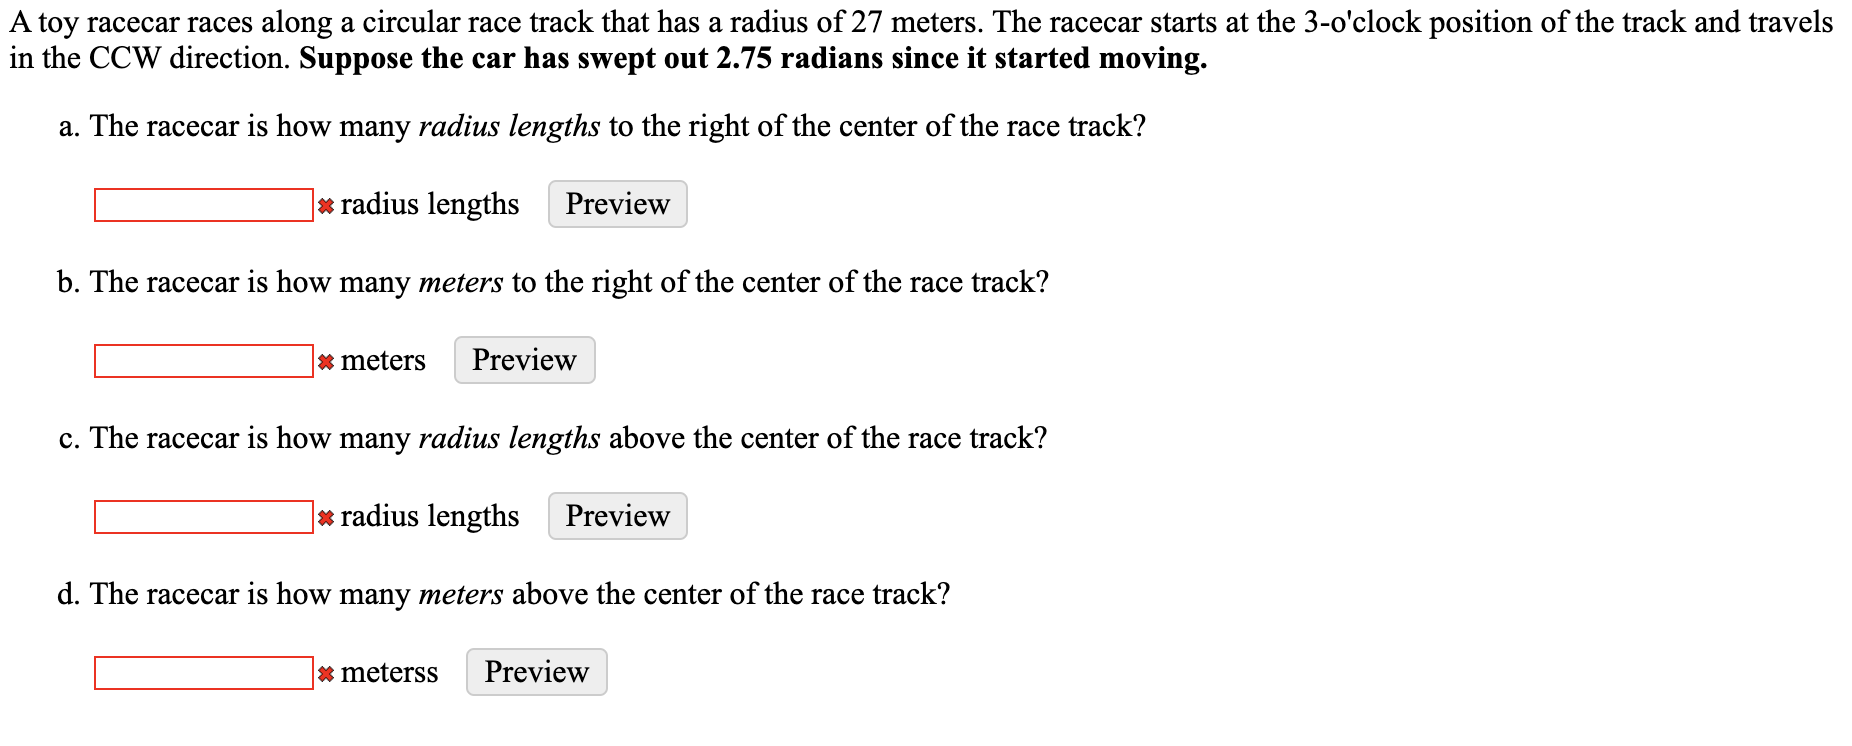 A toy racecar races along a circular race track that has a radius of 27 meters. The racecar starts at the 3-o'clock position of the track and travels
in the CCW direction. Suppose the car has swept out 2.75 radians since it started moving.
a. The racecar is how many radius lengths to the right of the center of the race track?
* radius lengths
Preview
b. The racecar is how many meters to the right of the center of the race track?
* meters
Preview
c. The racecar is how many radius lengths above the center of the race track?
* radius lengths
Preview
d. The racecar is how many meters above the center of the race track?
* meterss
Preview
